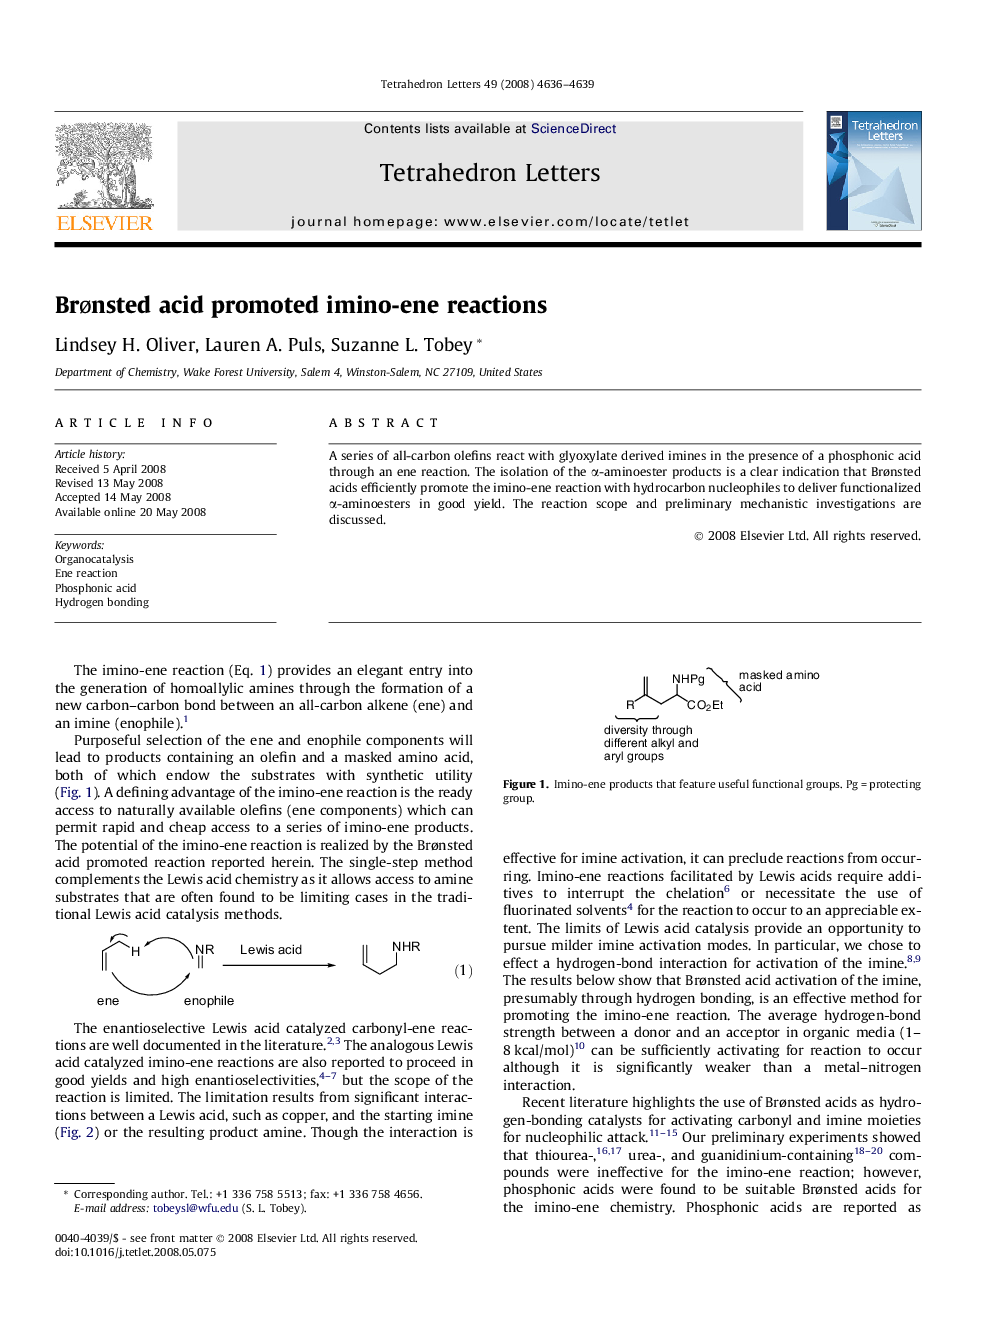 BrÃ¸nsted acid promoted imino-ene reactions